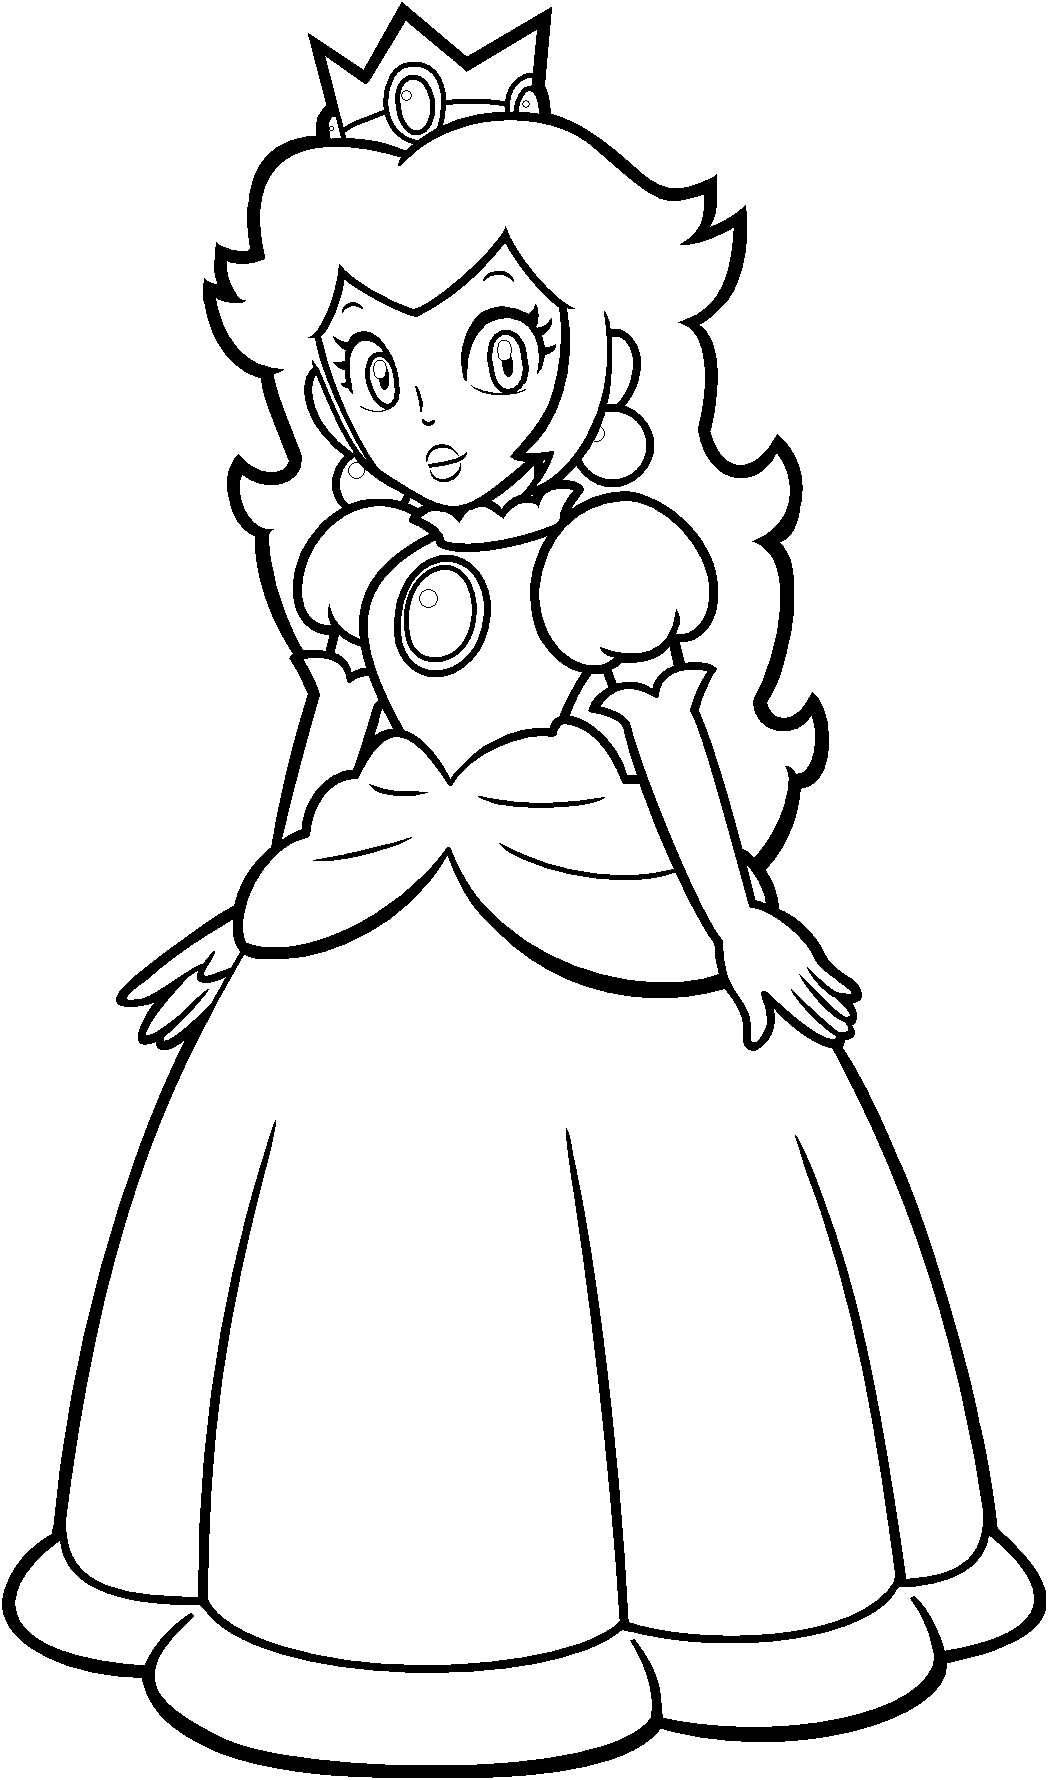 Printable Princess Peach - Coloring Pages for Kids and for Adults